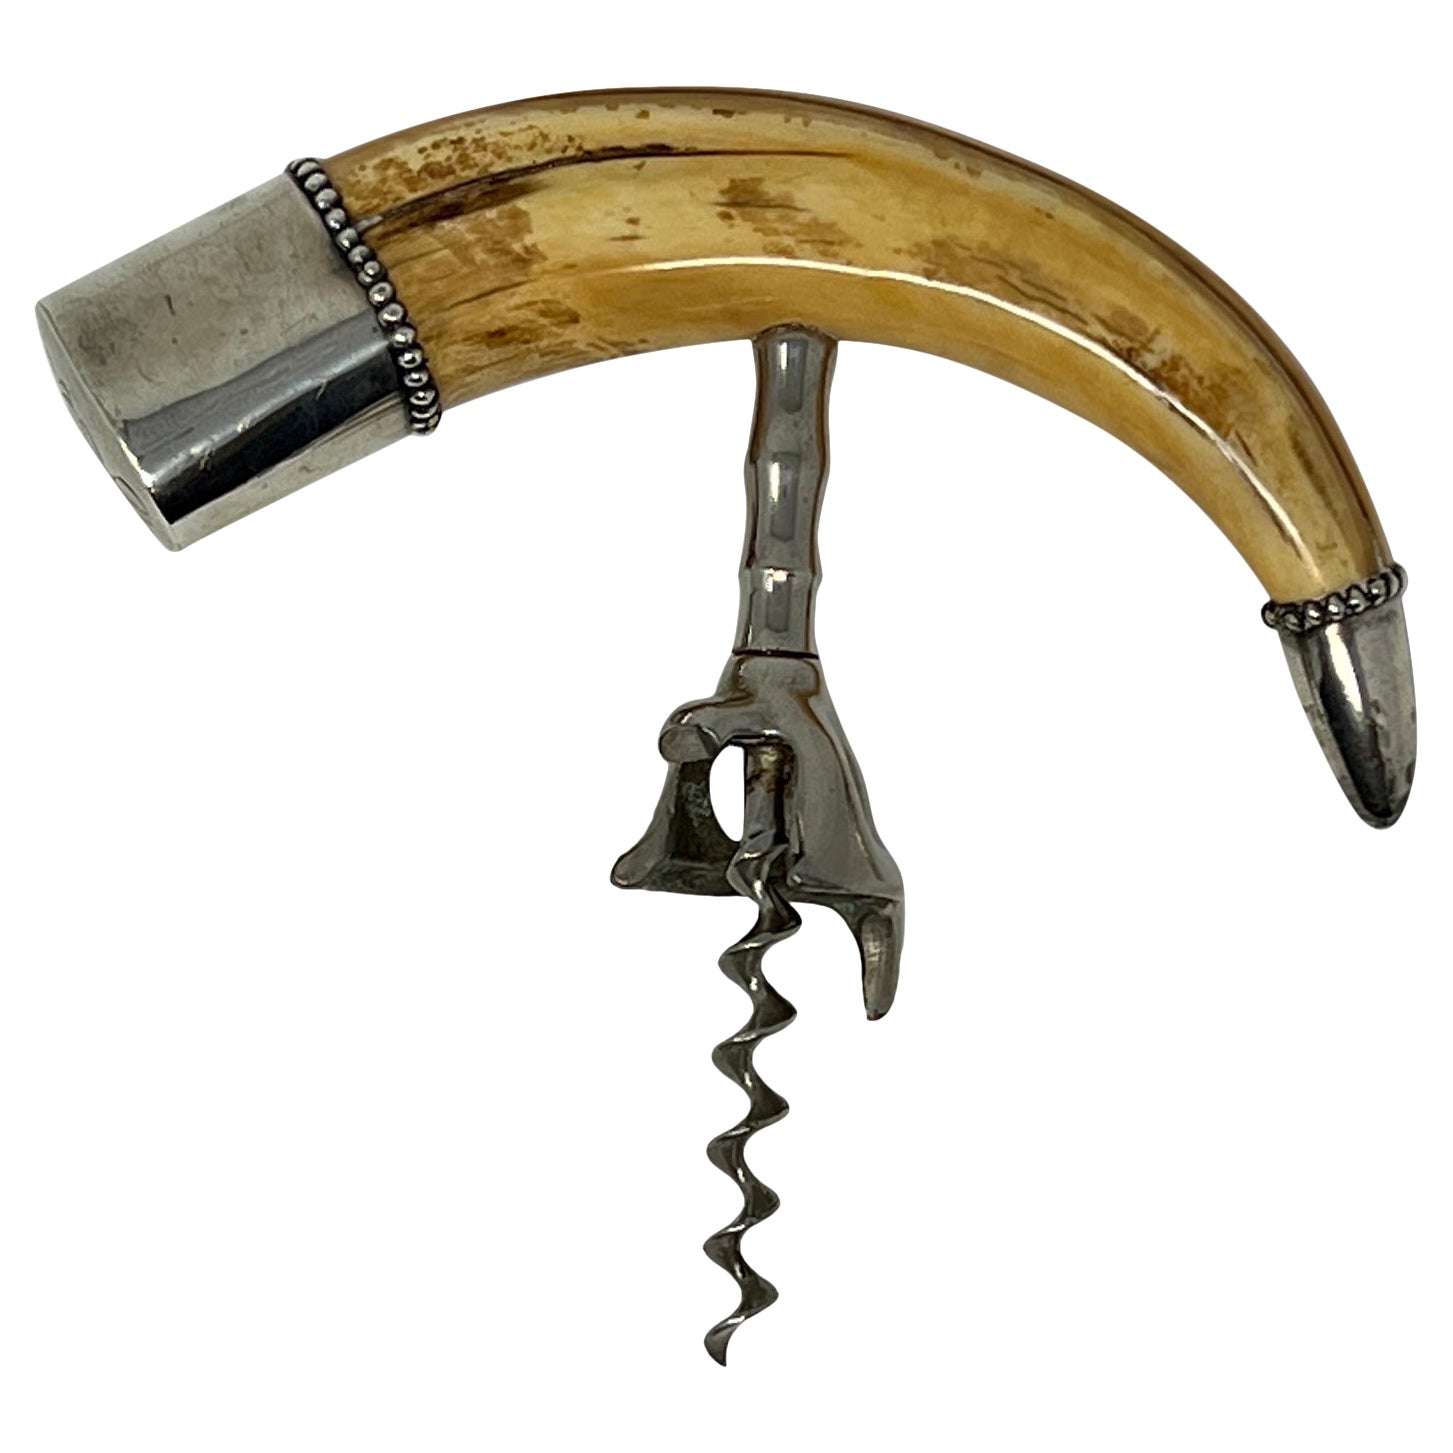 Antique Sterling Silver Mounted "Boar's Tusk" Corkscrew, Circa 1900. For Sale